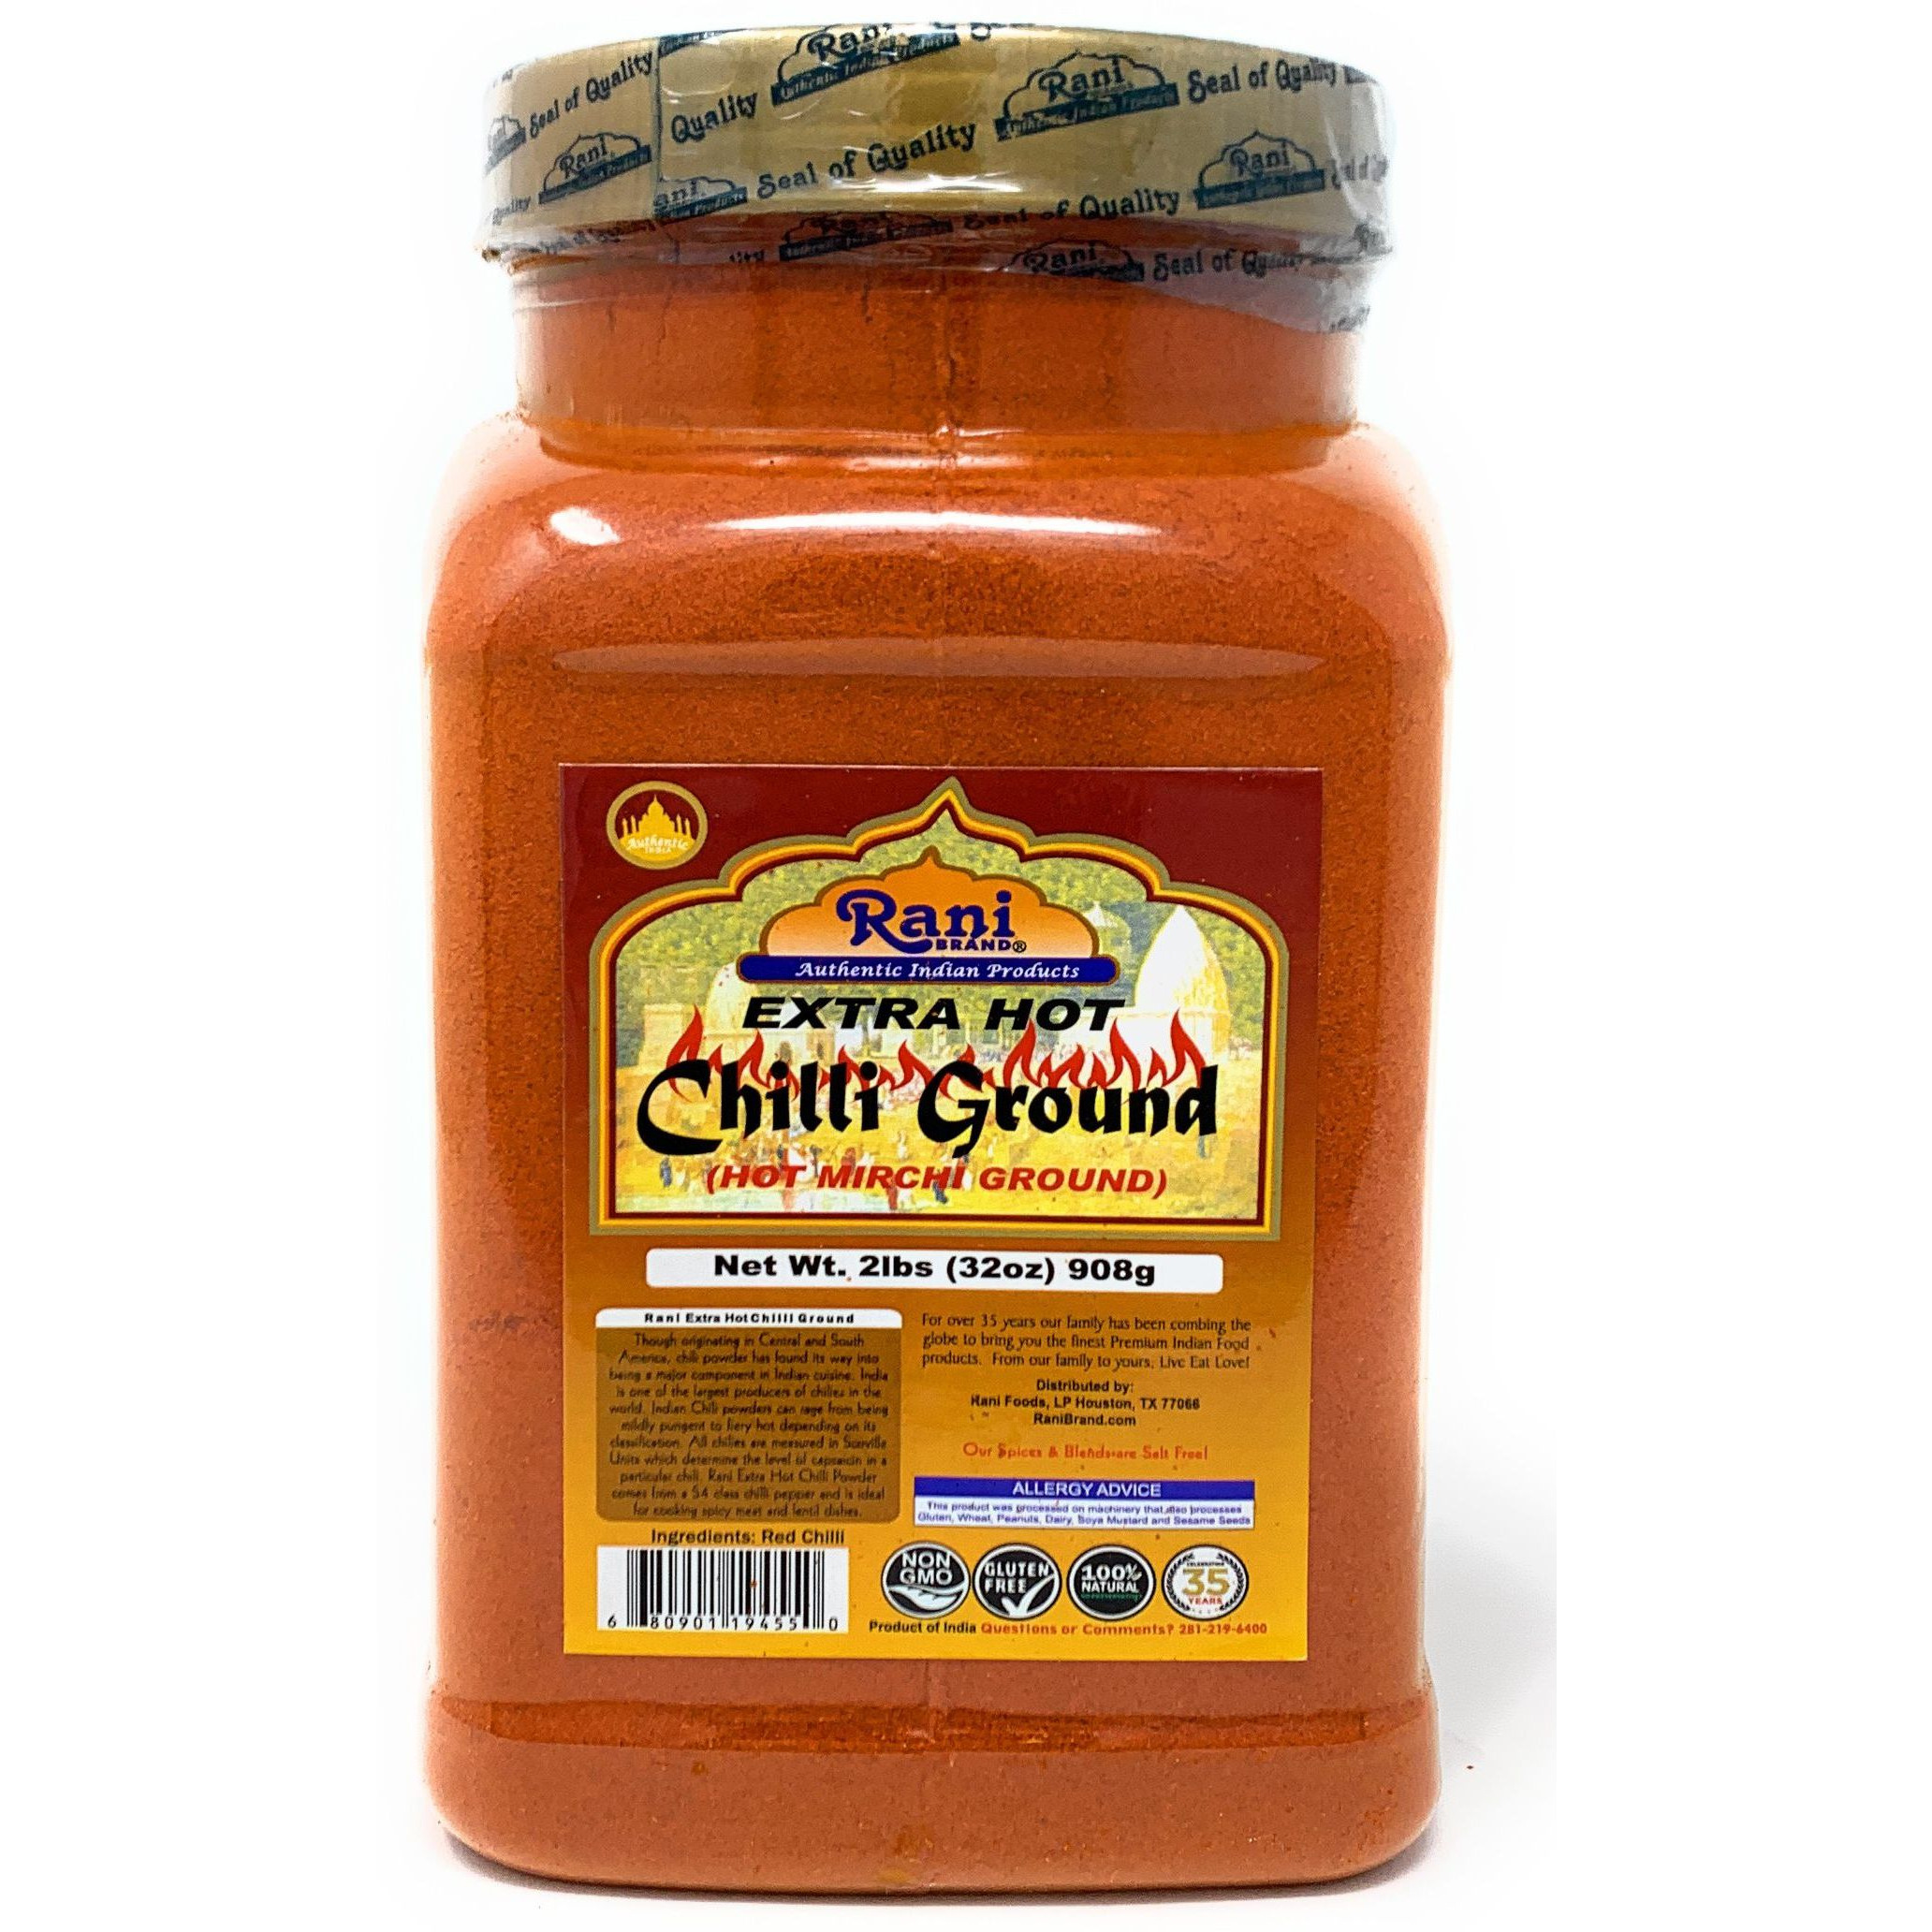 Rani Extra Hot Chilli Powder Indian Spice 2lbs (32oz) Bulk Pack ~ All Natural, No Color added, Gluten Friendly | Vegan | NON-GMO | No Salt or fillers